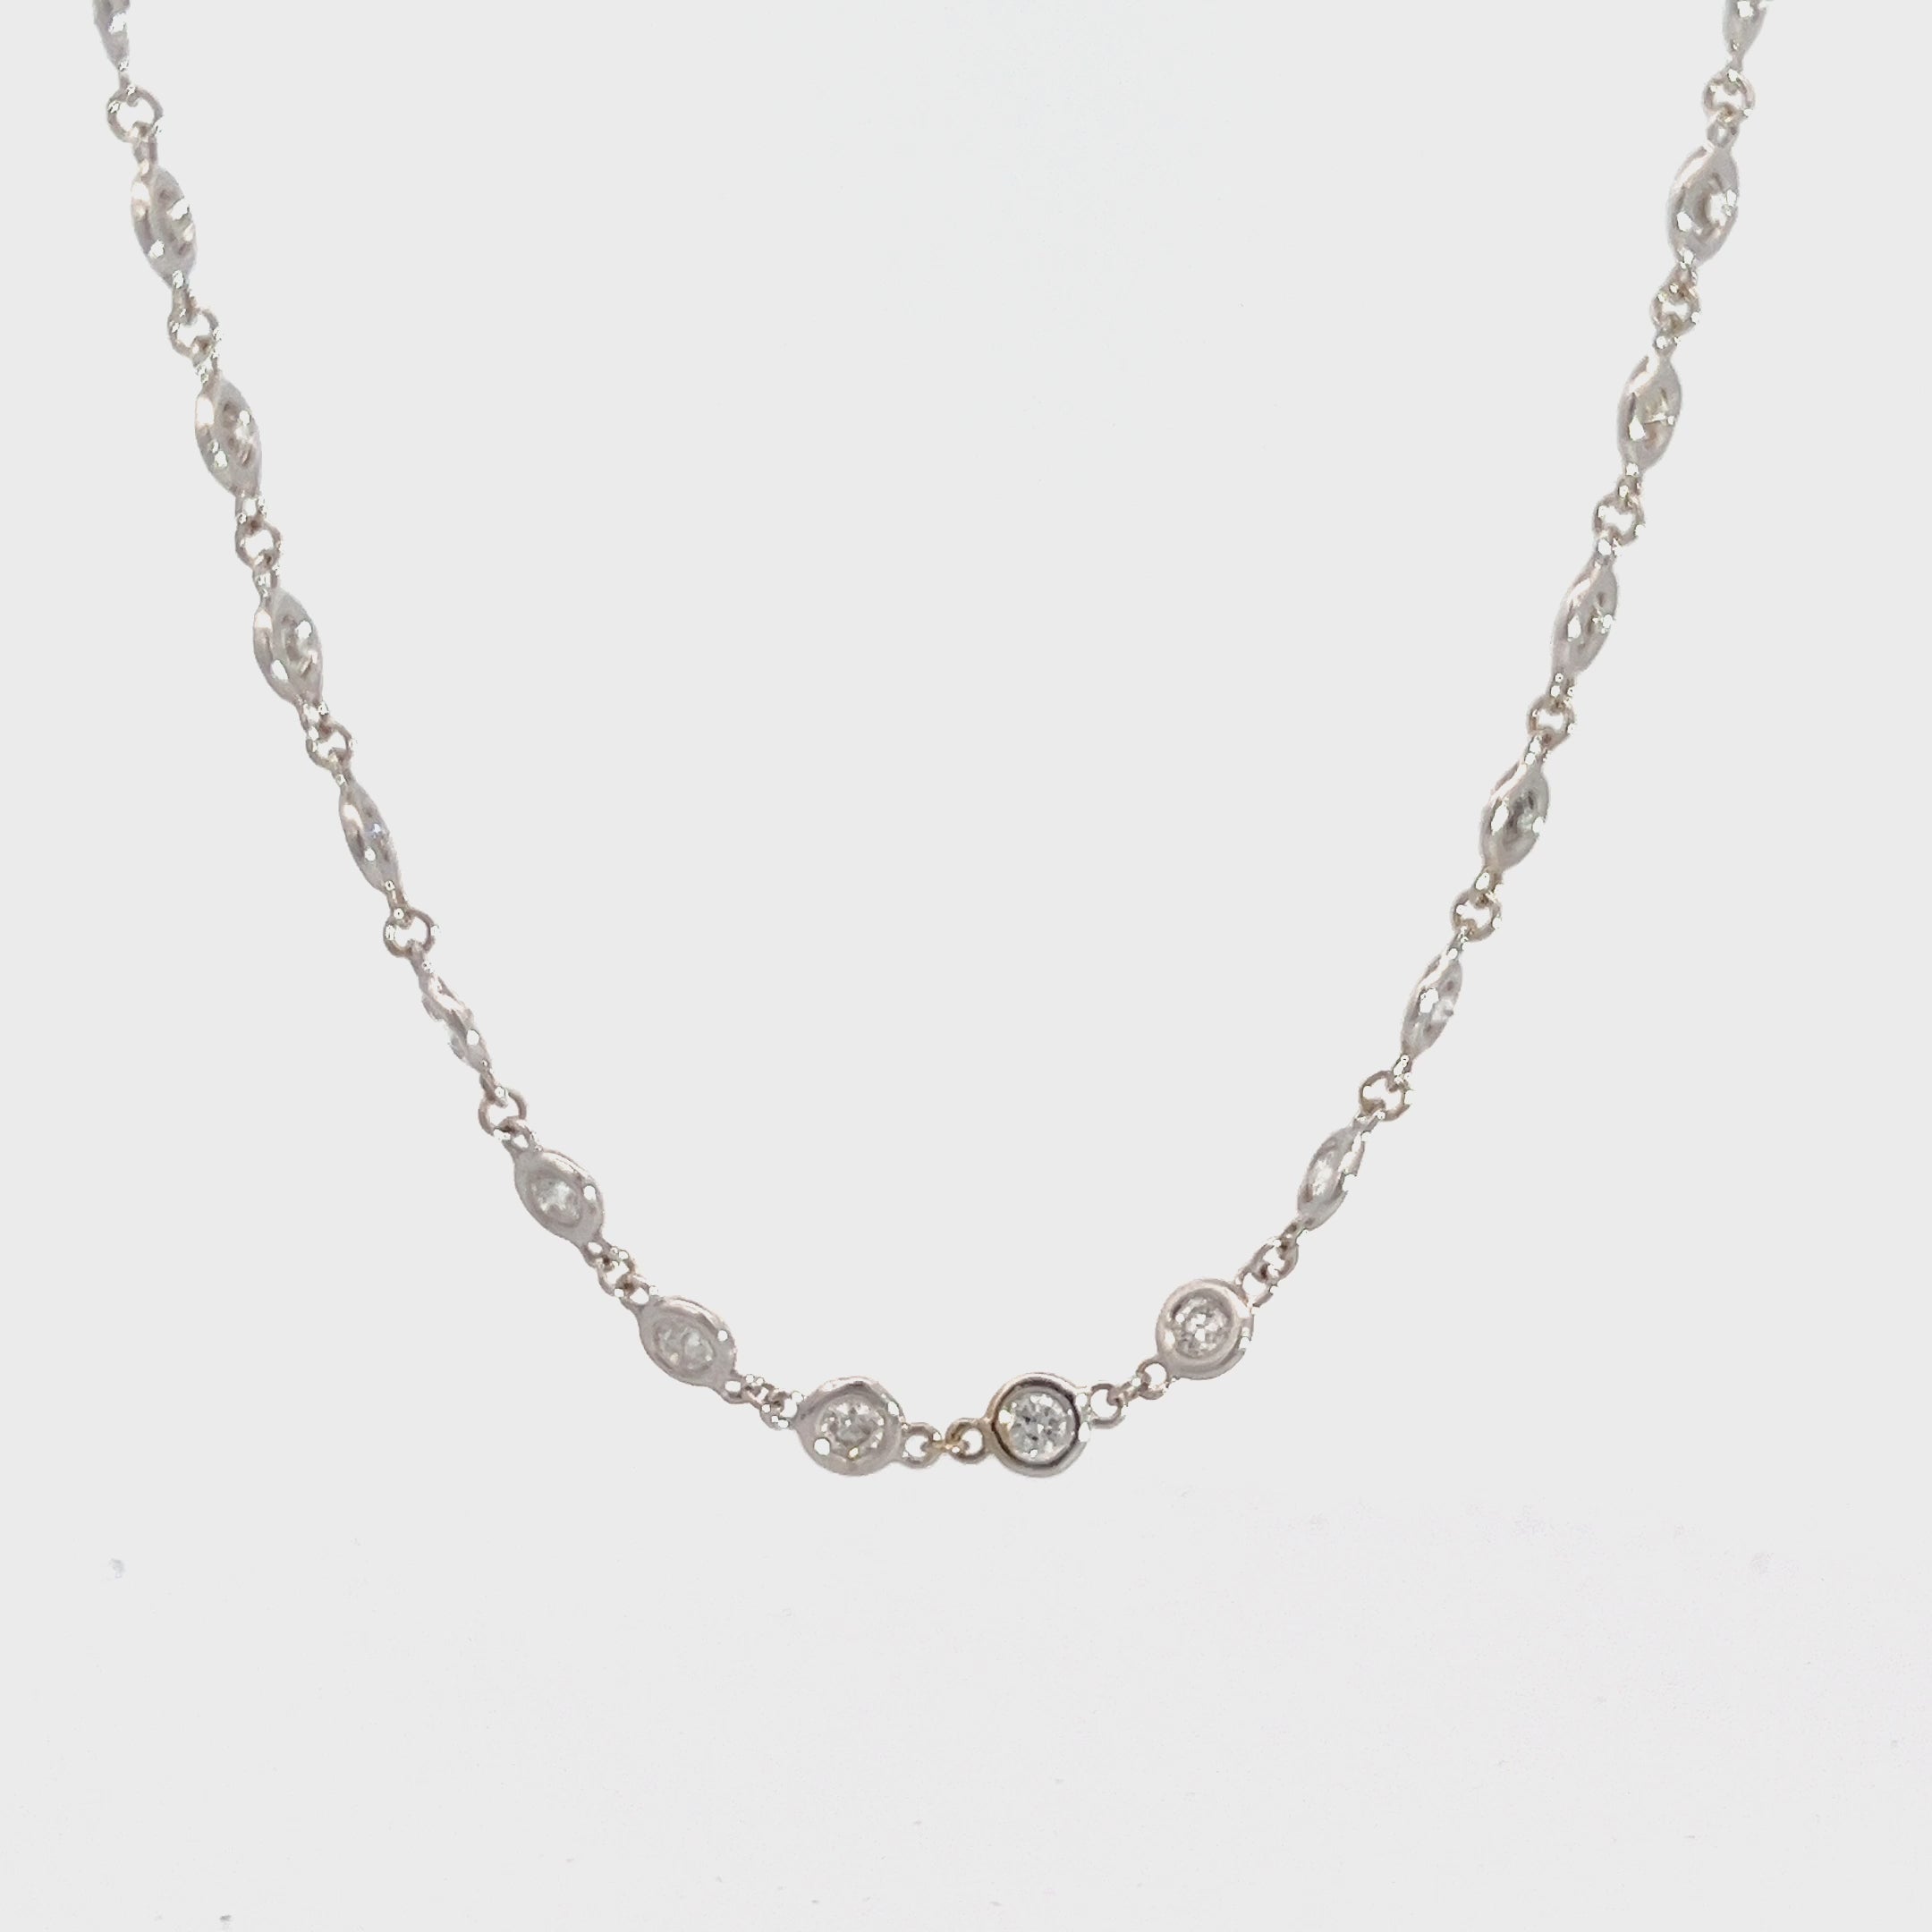 Ladies 14k White Gold Diamonds by the Yard Necklace